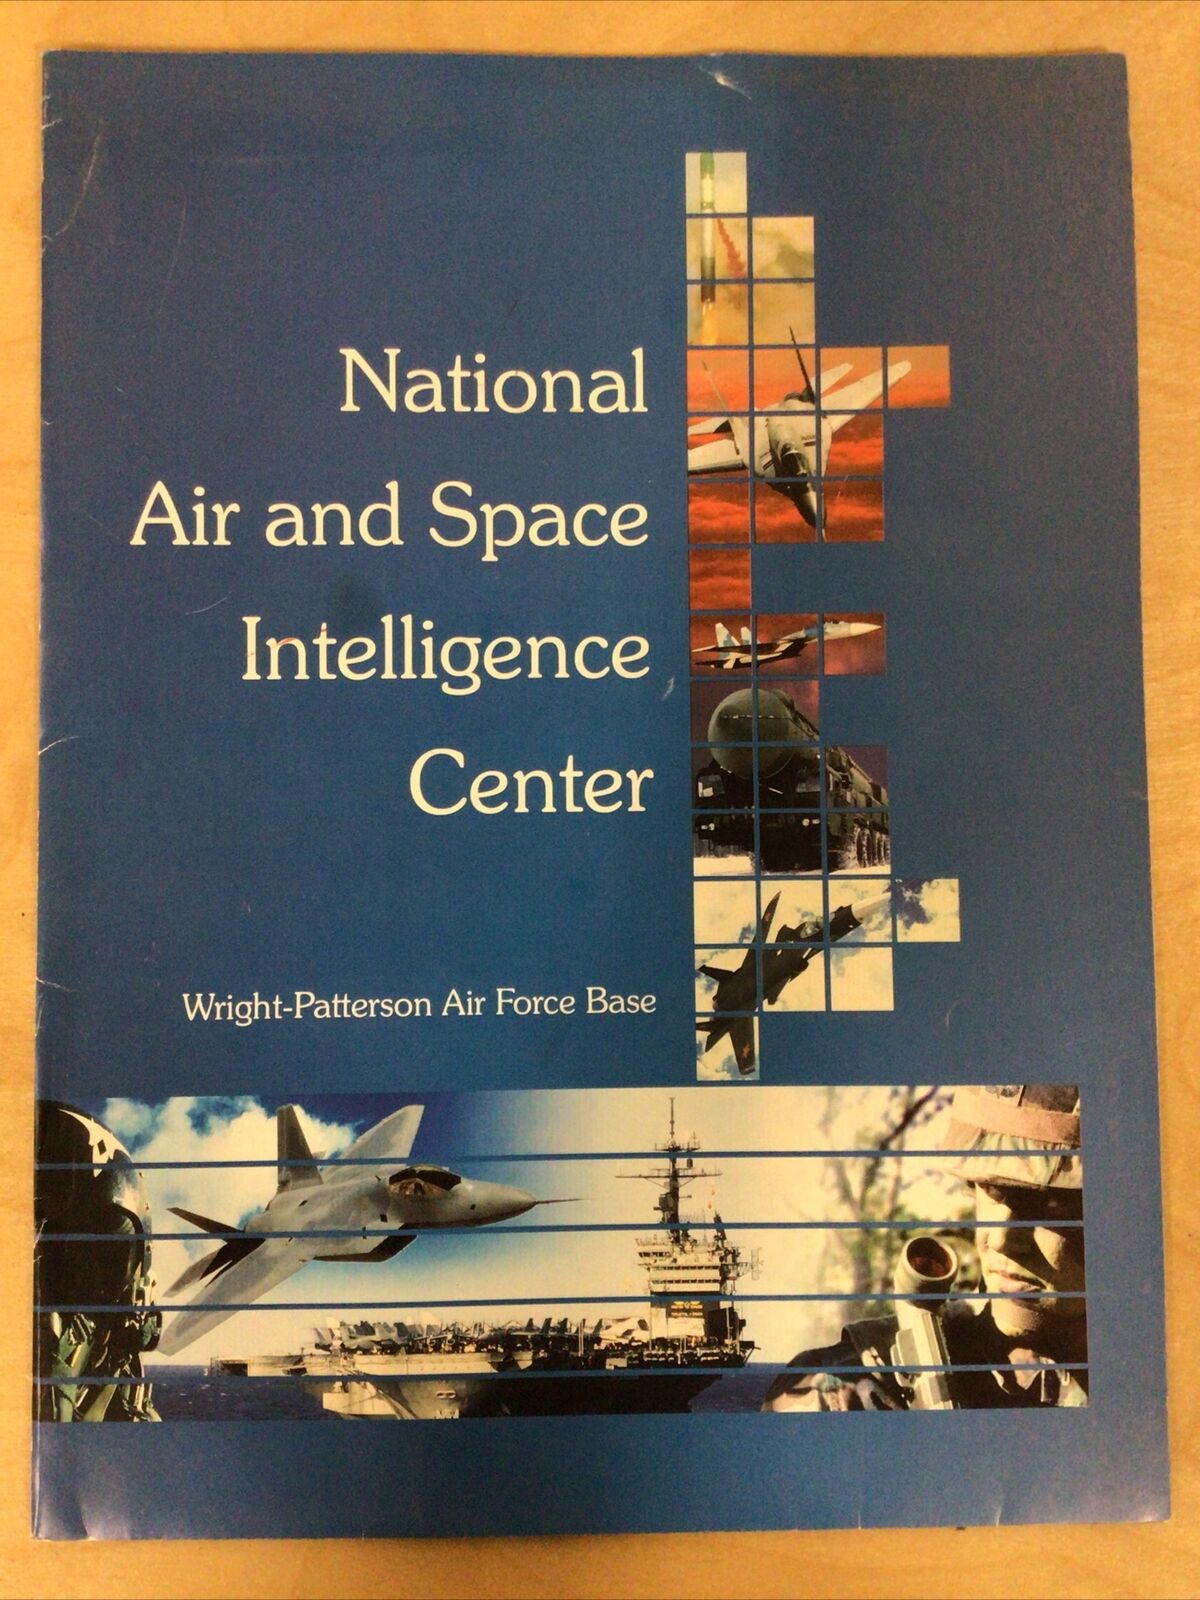 National Air & Space Intelligence Center Alumni Information - Tom. D Crouch